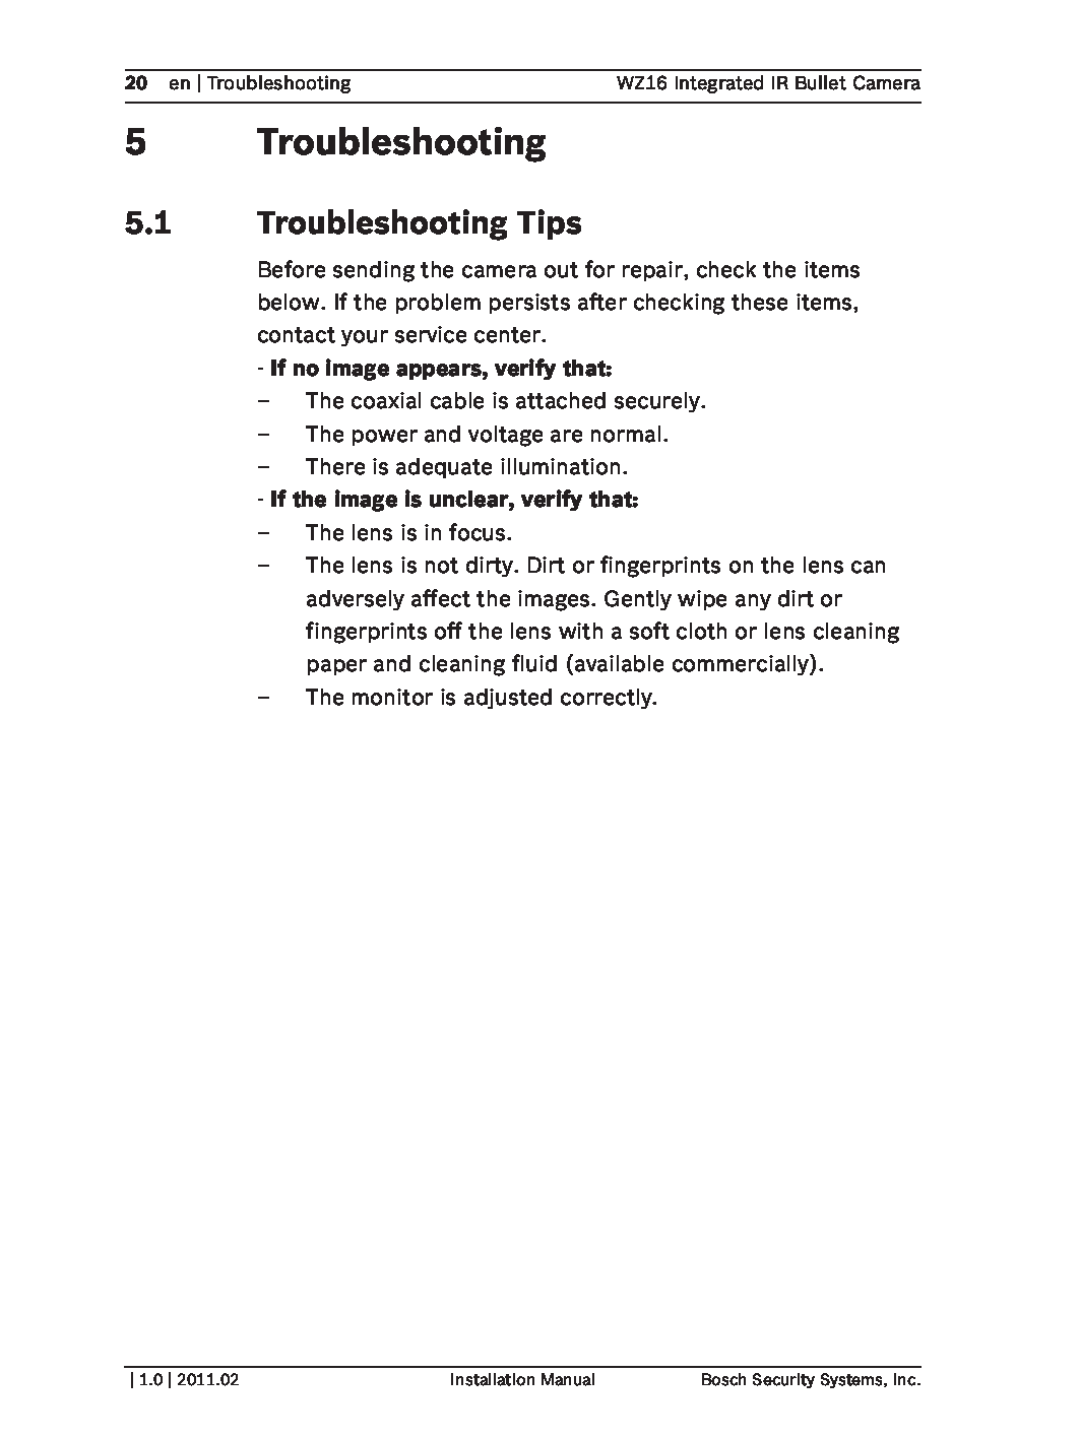 Bosch Appliances WZ16 installation manual 5Troubleshooting, 5.1Troubleshooting Tips 